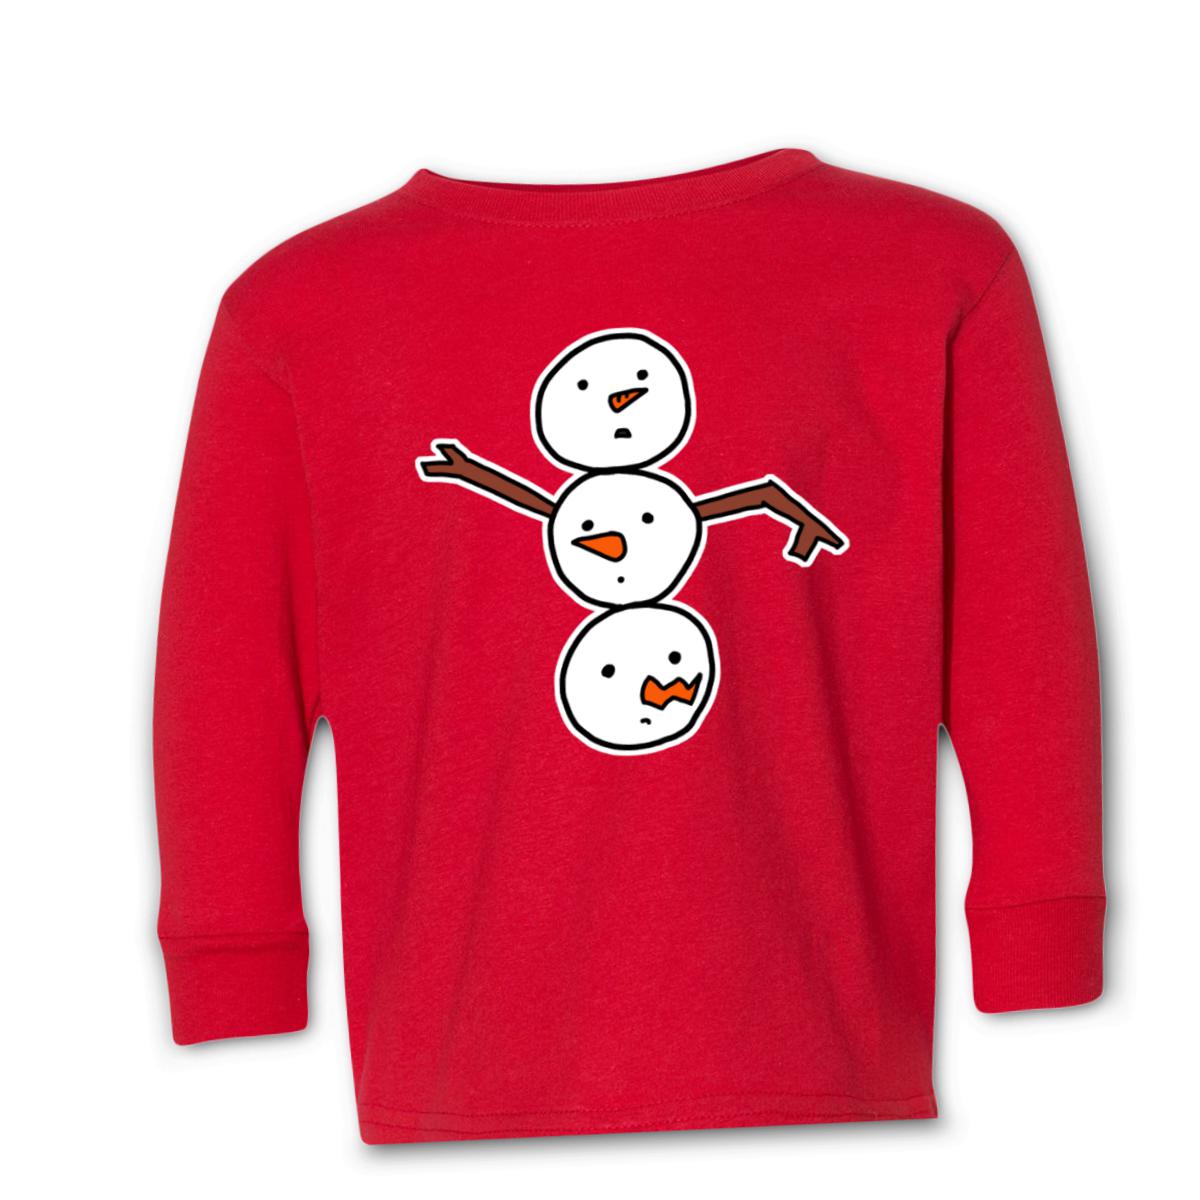 Snowman All Heads Kid's Long Sleeve Tee Large red